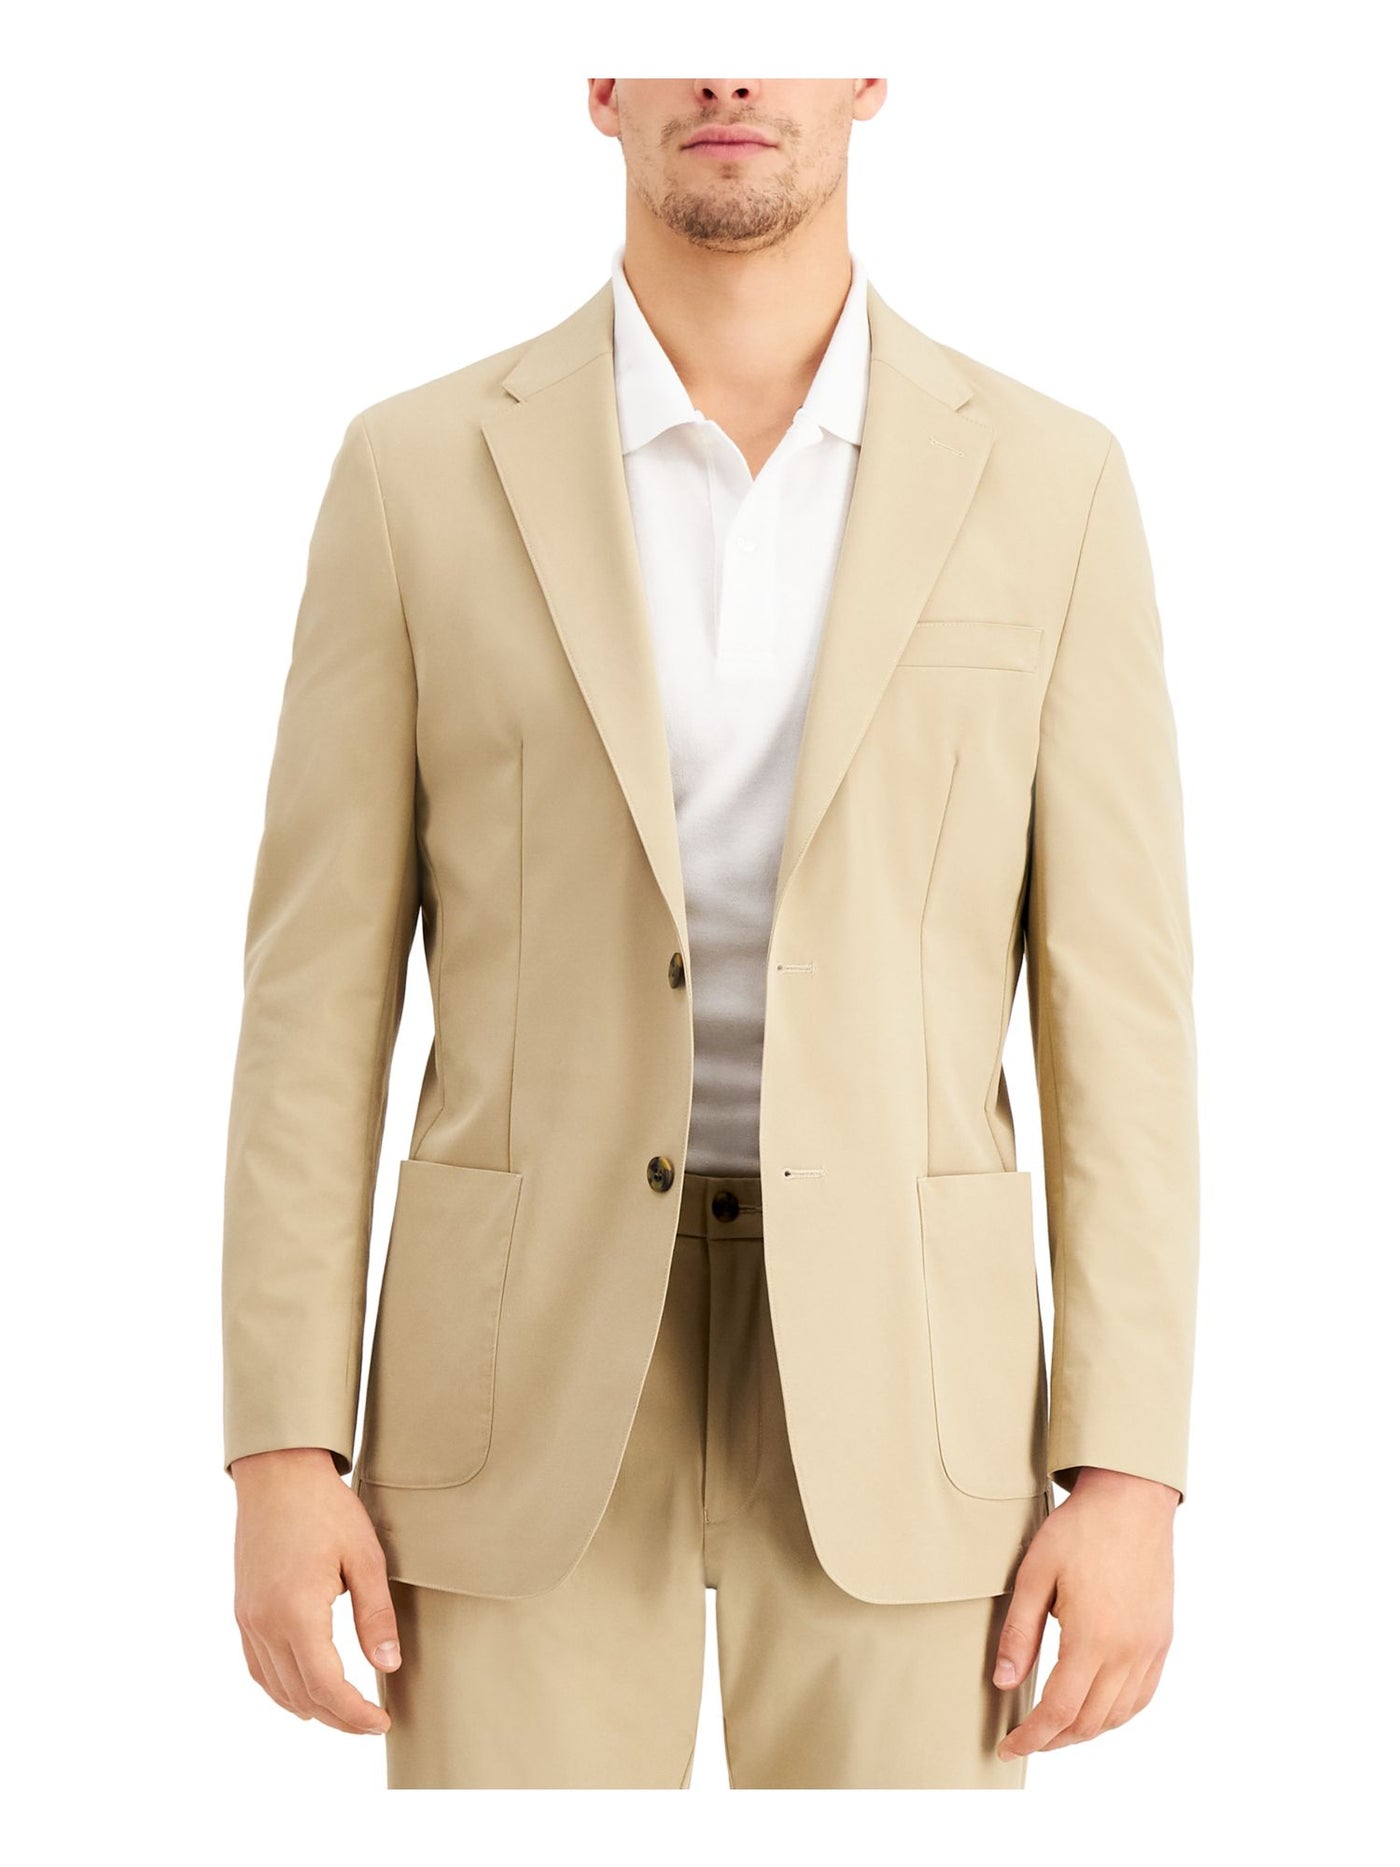 TOMMY HILFIGER Mens Beige Single Breasted, Classic Fit Performance Stretch Suit Separate Blazer Jacket 40L